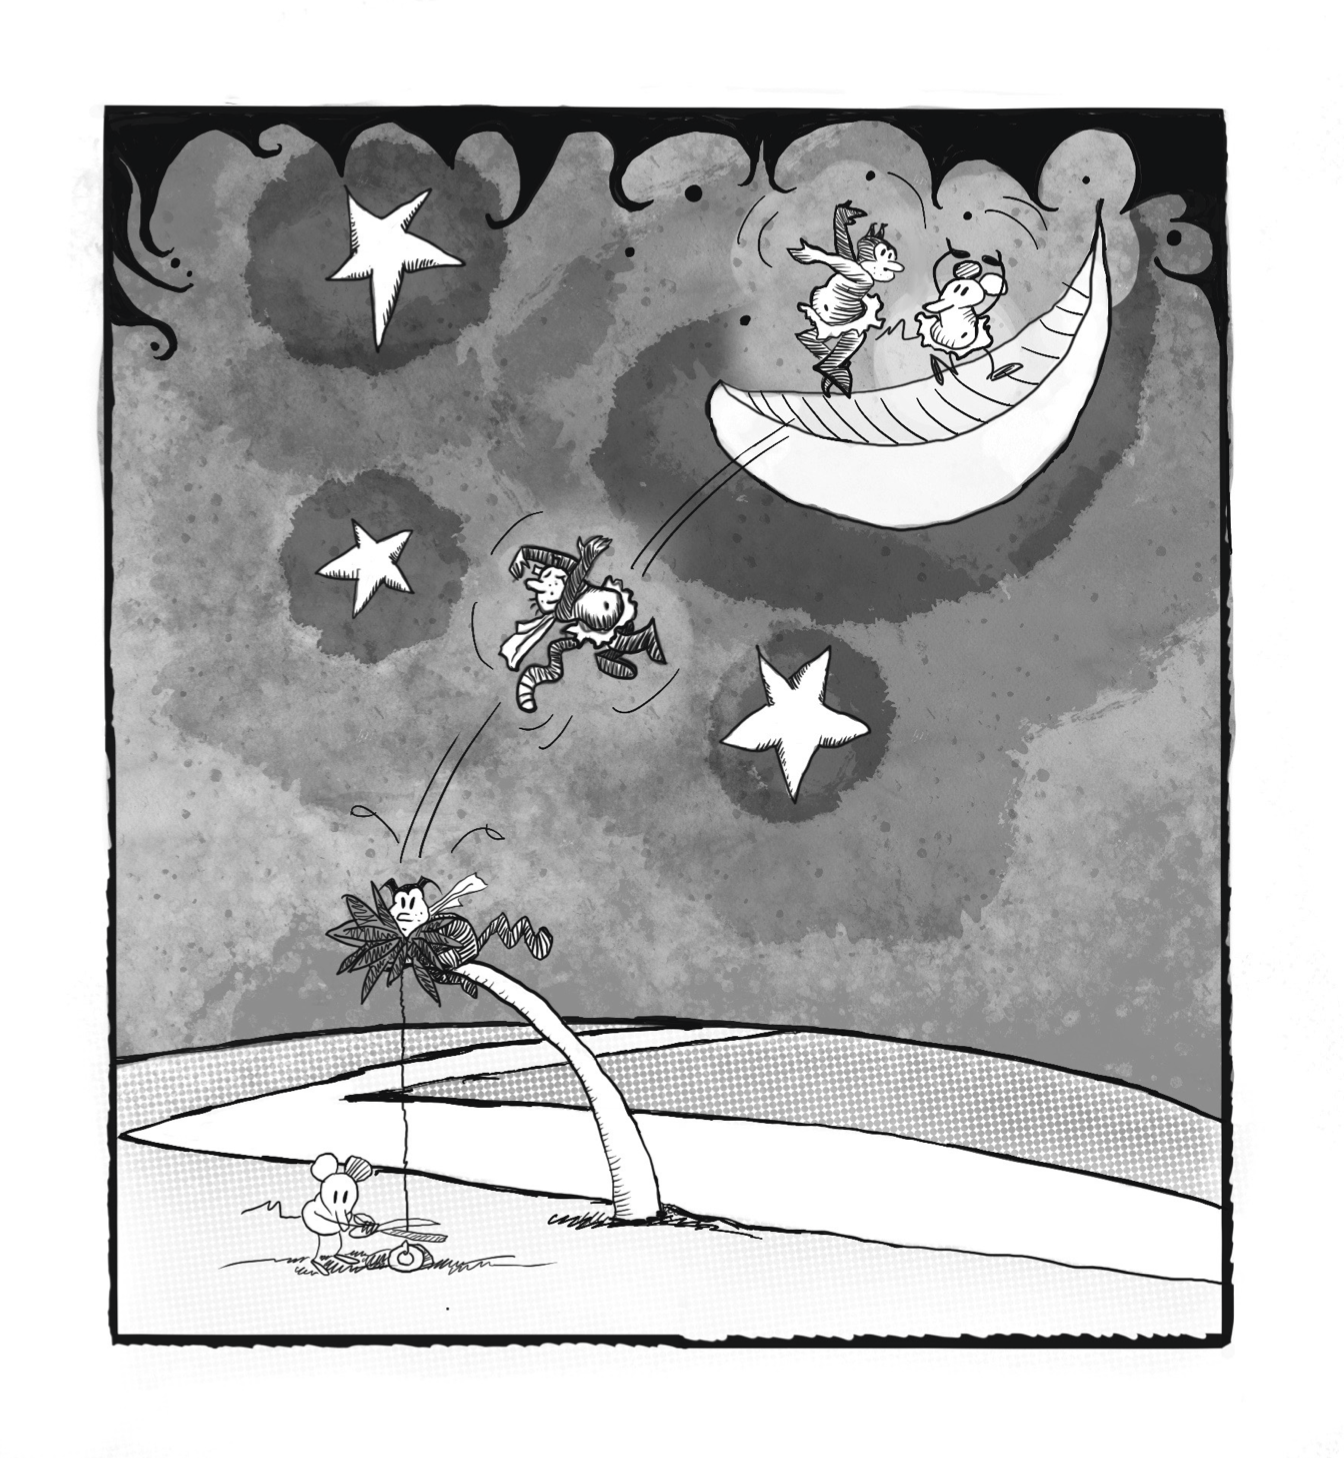 Ignatz launches Krazy from a palm tree onto the crescent moon in the sky, where they dance together in tutus